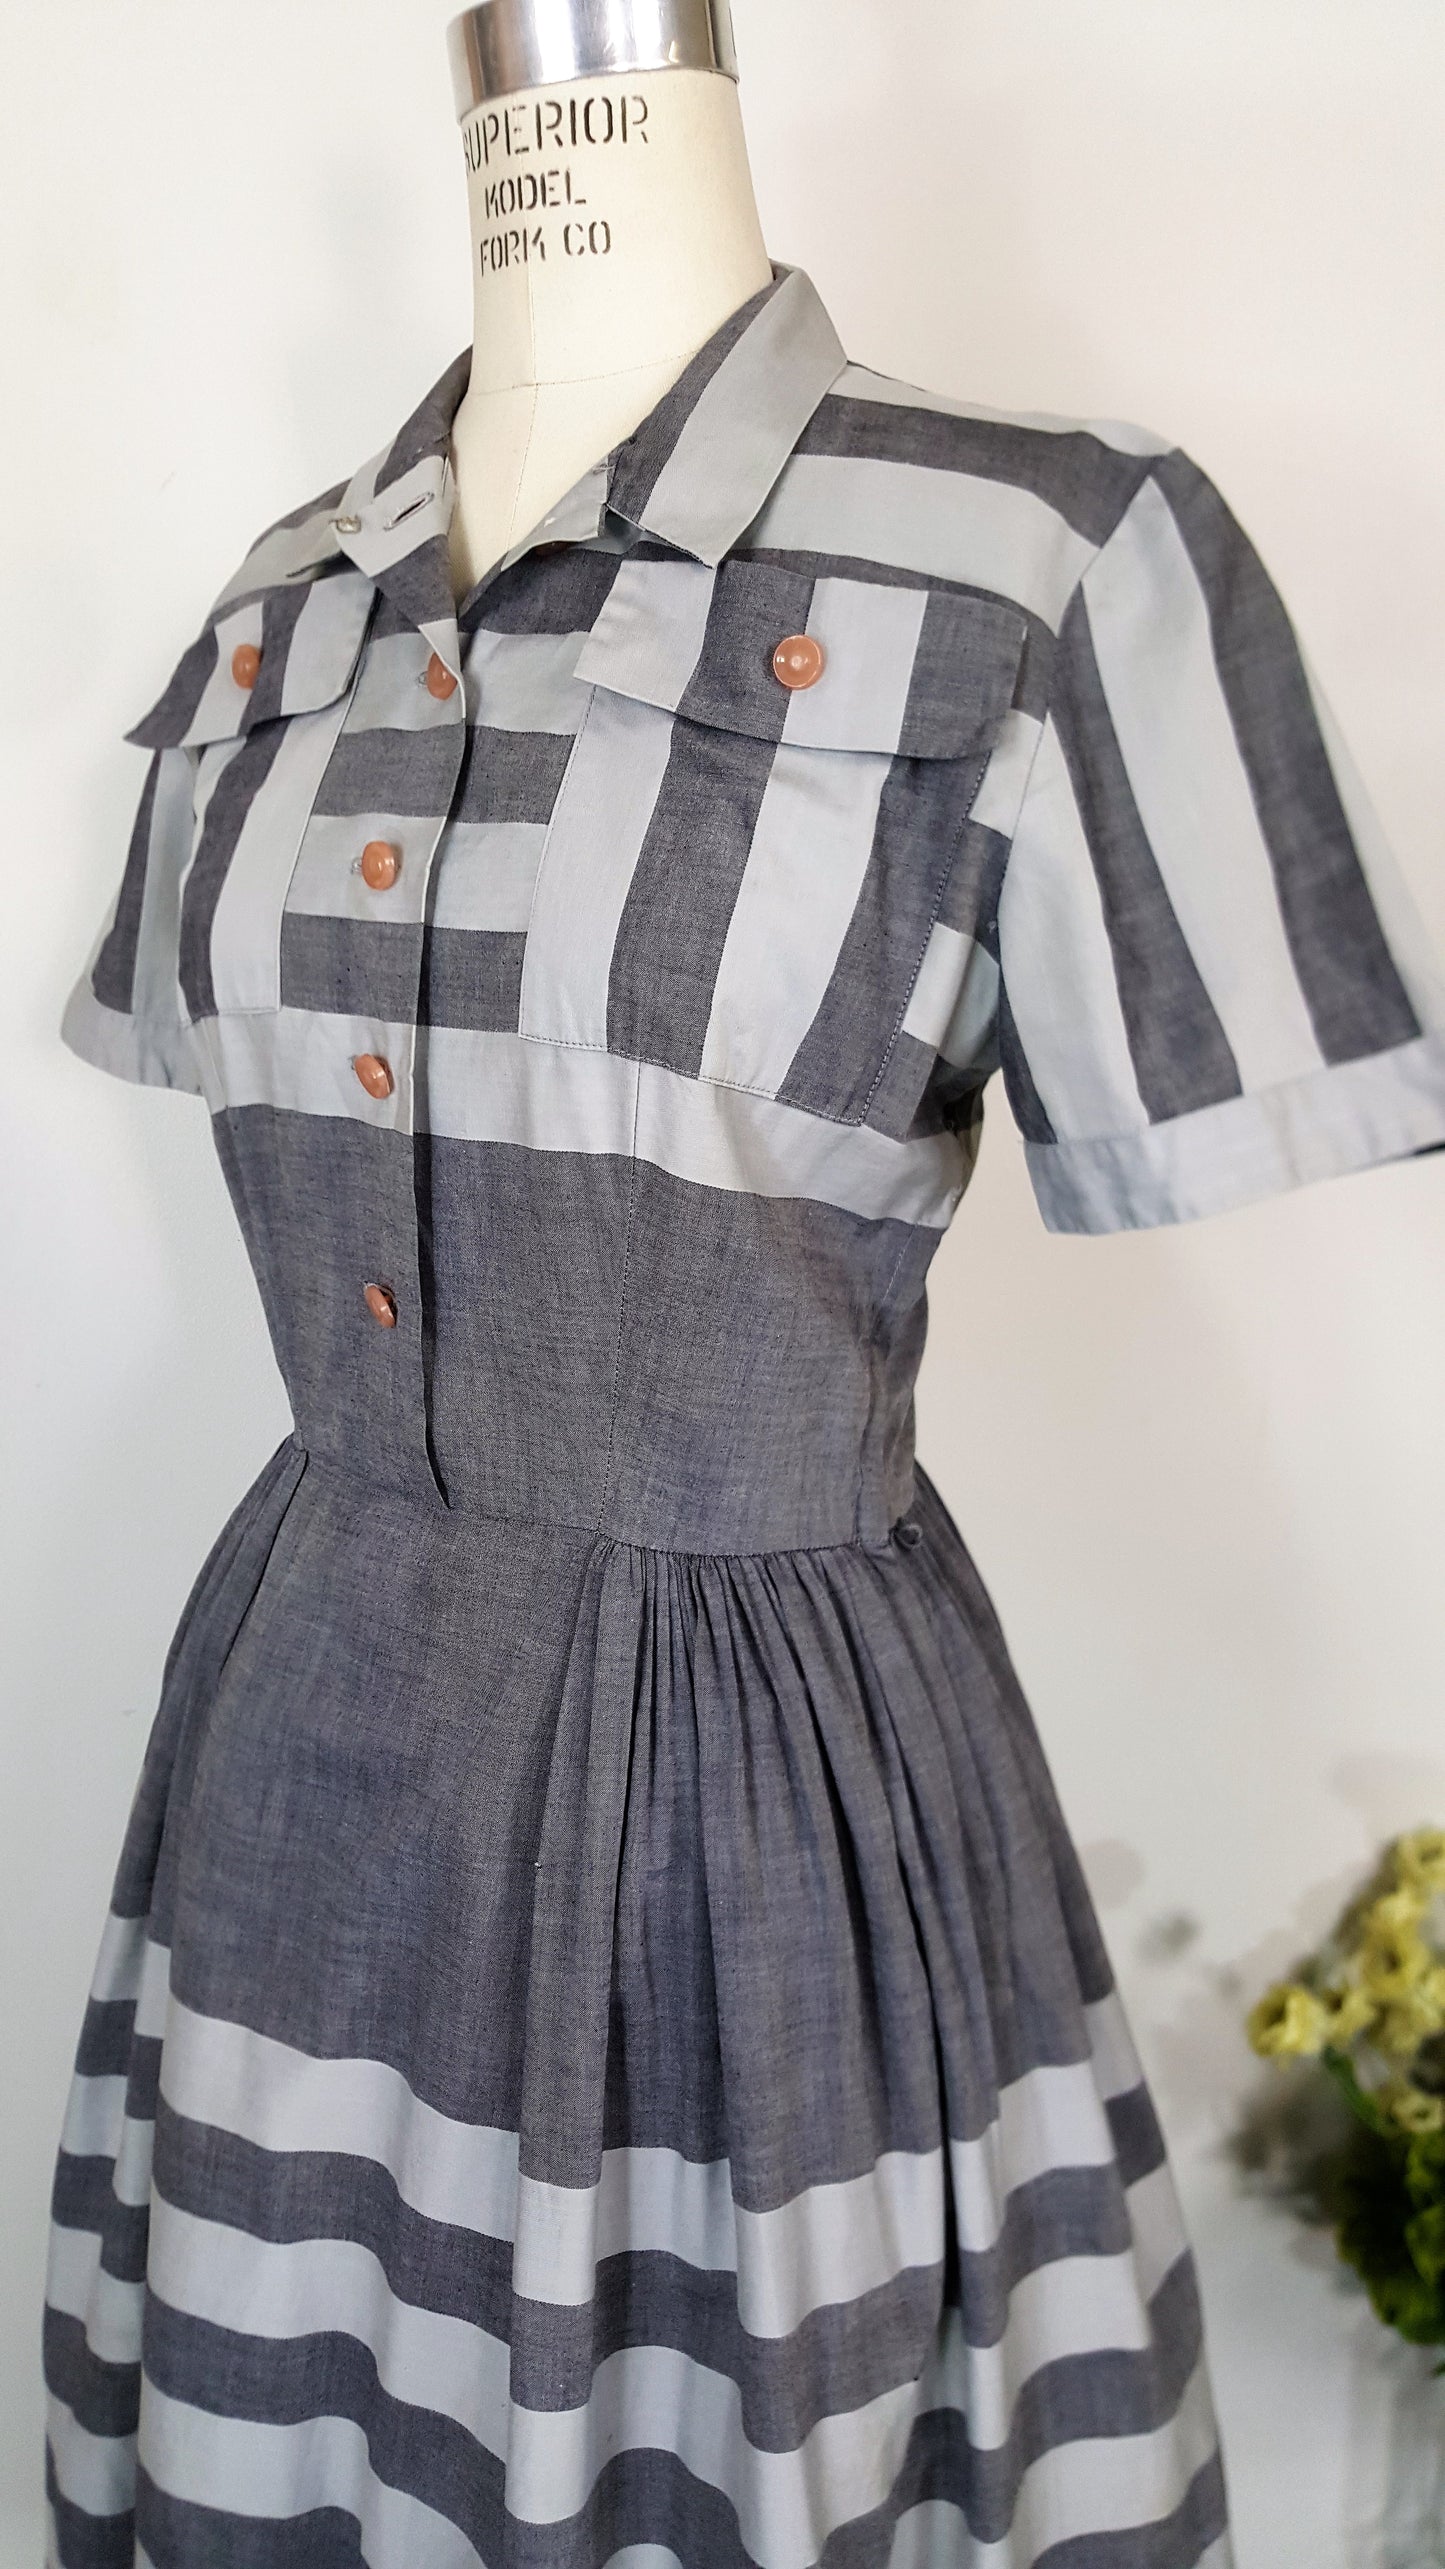 Vintage 1940s 1950s Gray Striped Shirtwaist Dress With Pockets